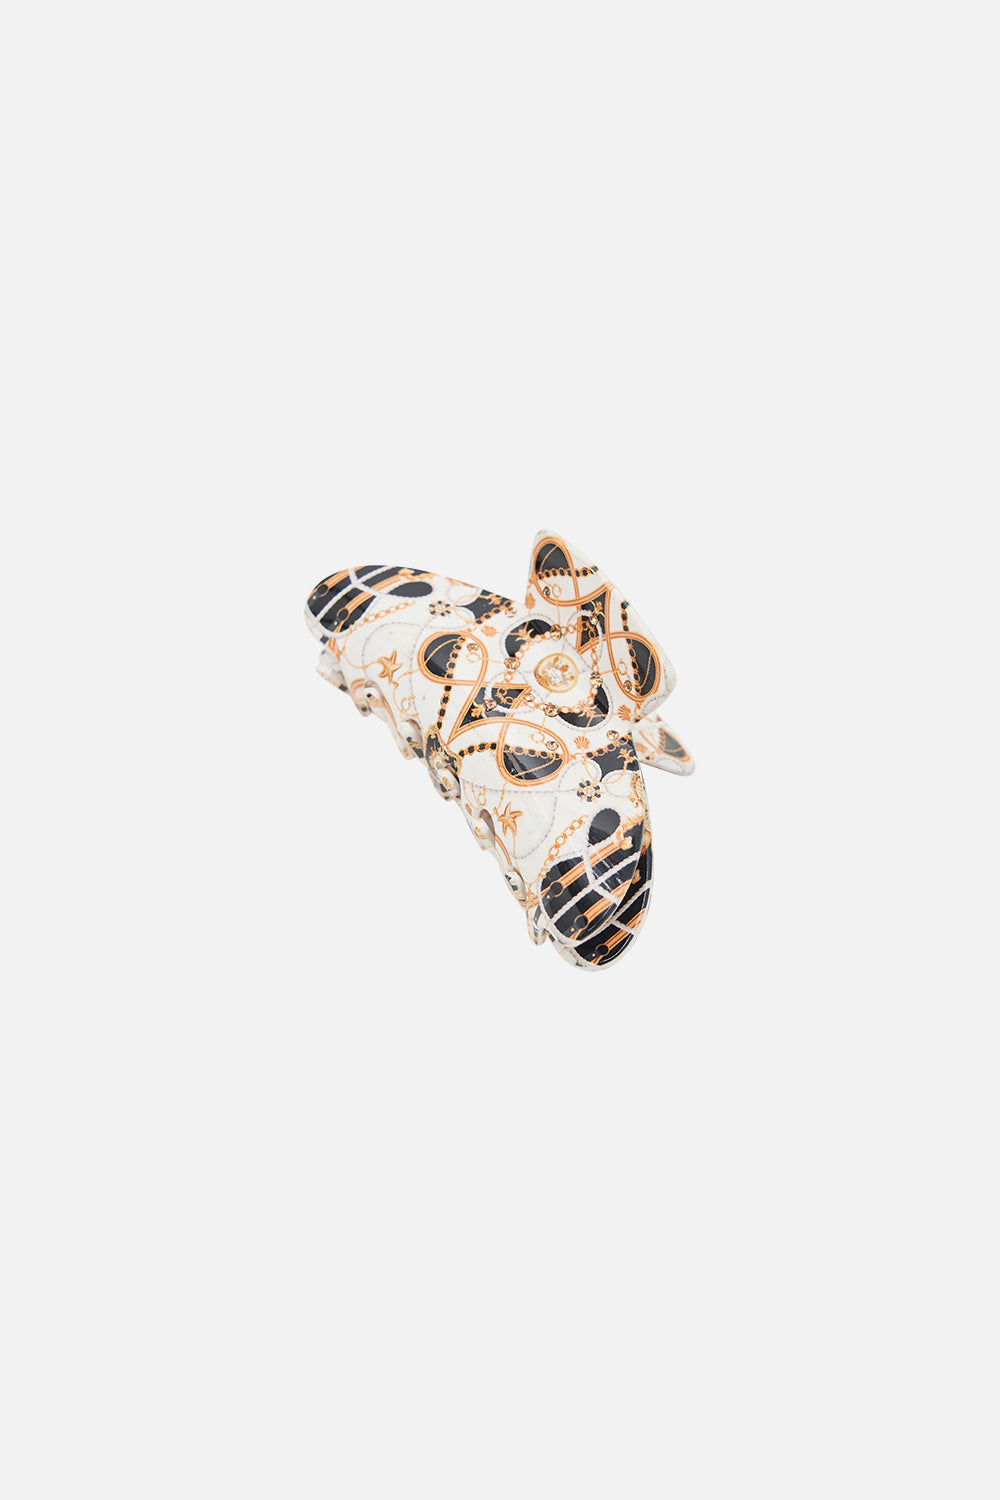 Product view of CAMILLA deisgner hair clasp in Sea Charm print